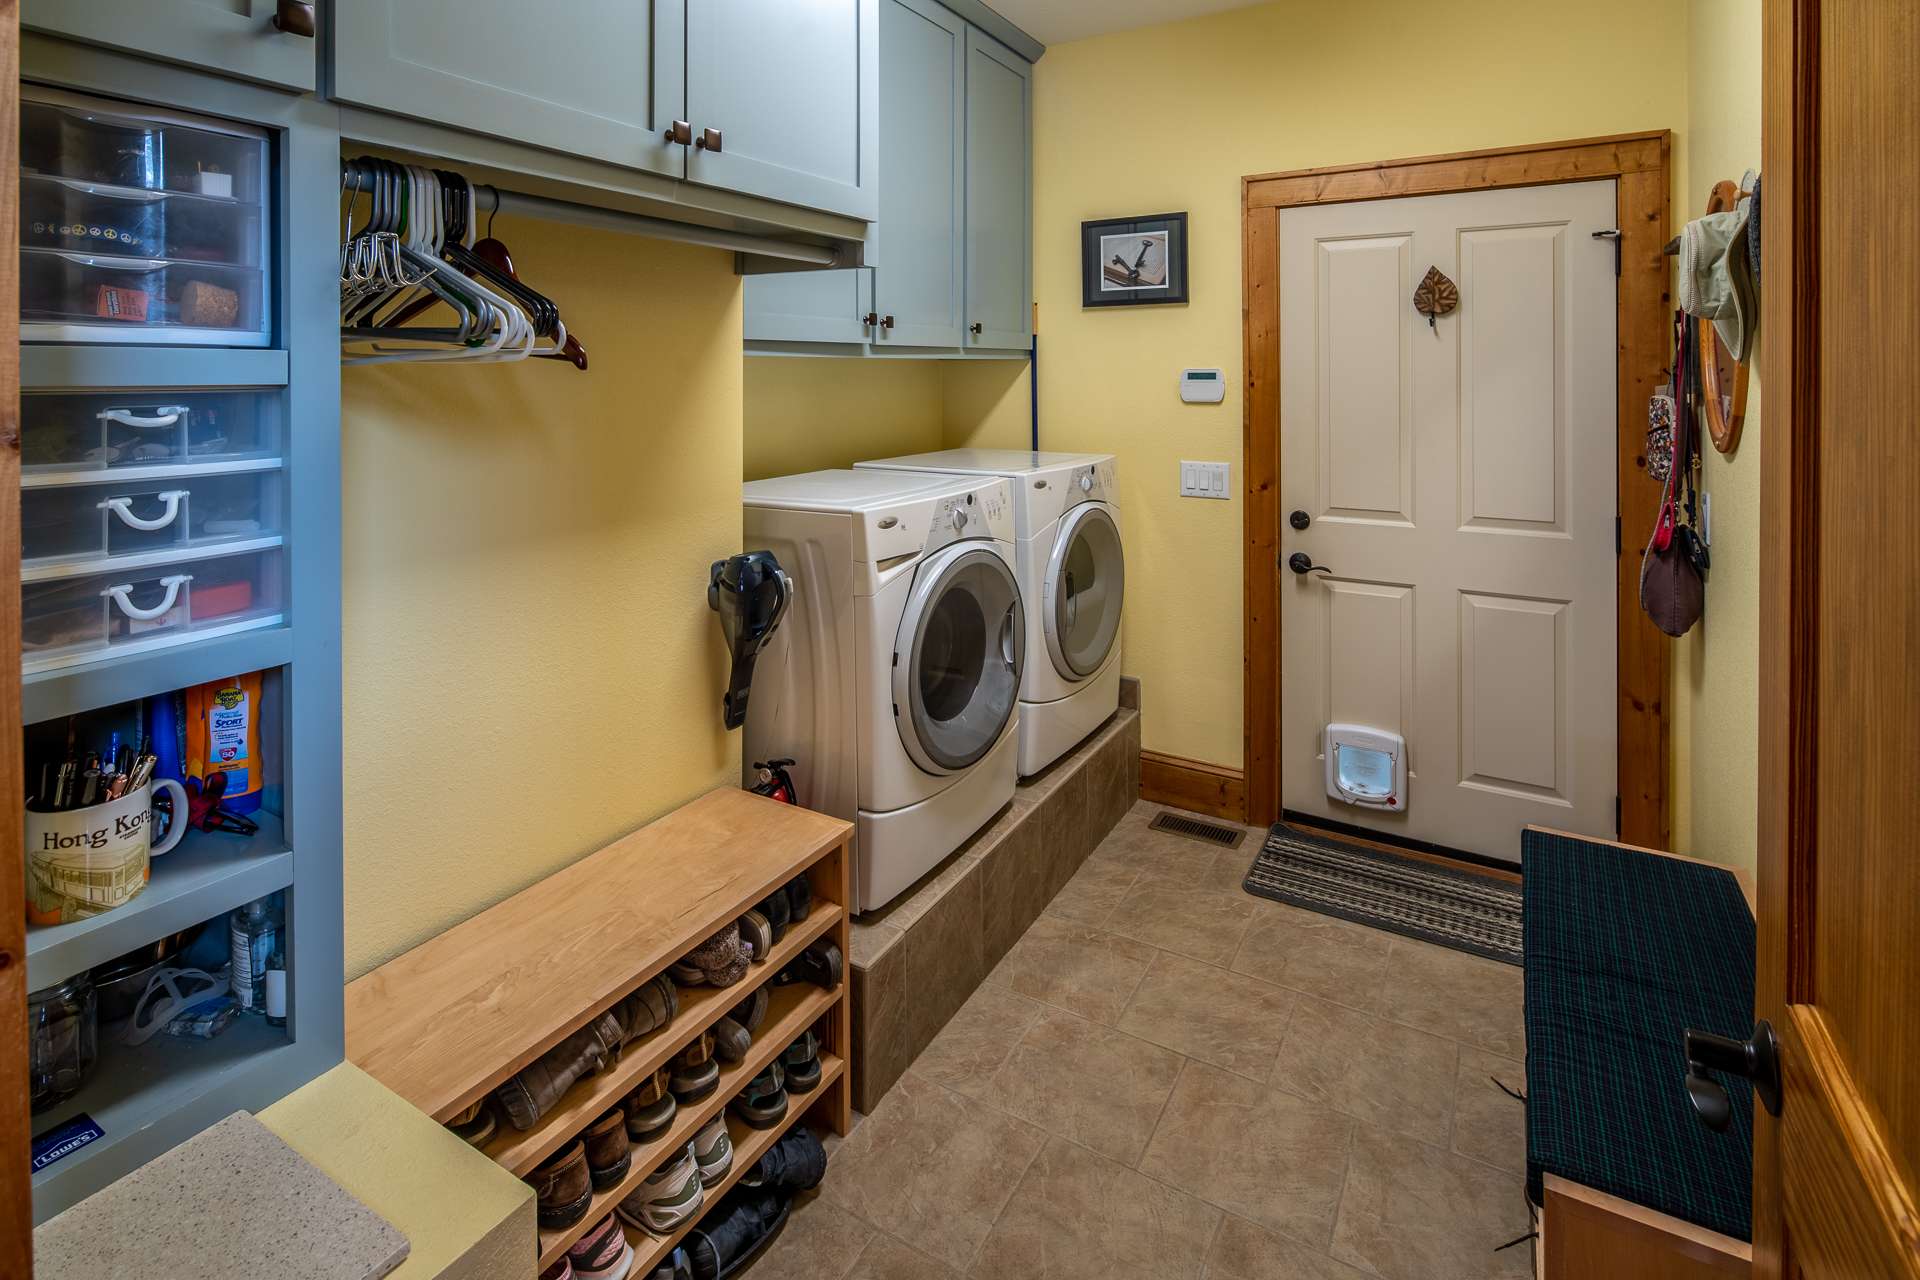 Laundry room also serves as mudroom between garage and great room.  Plenty of storage space with built-ins.